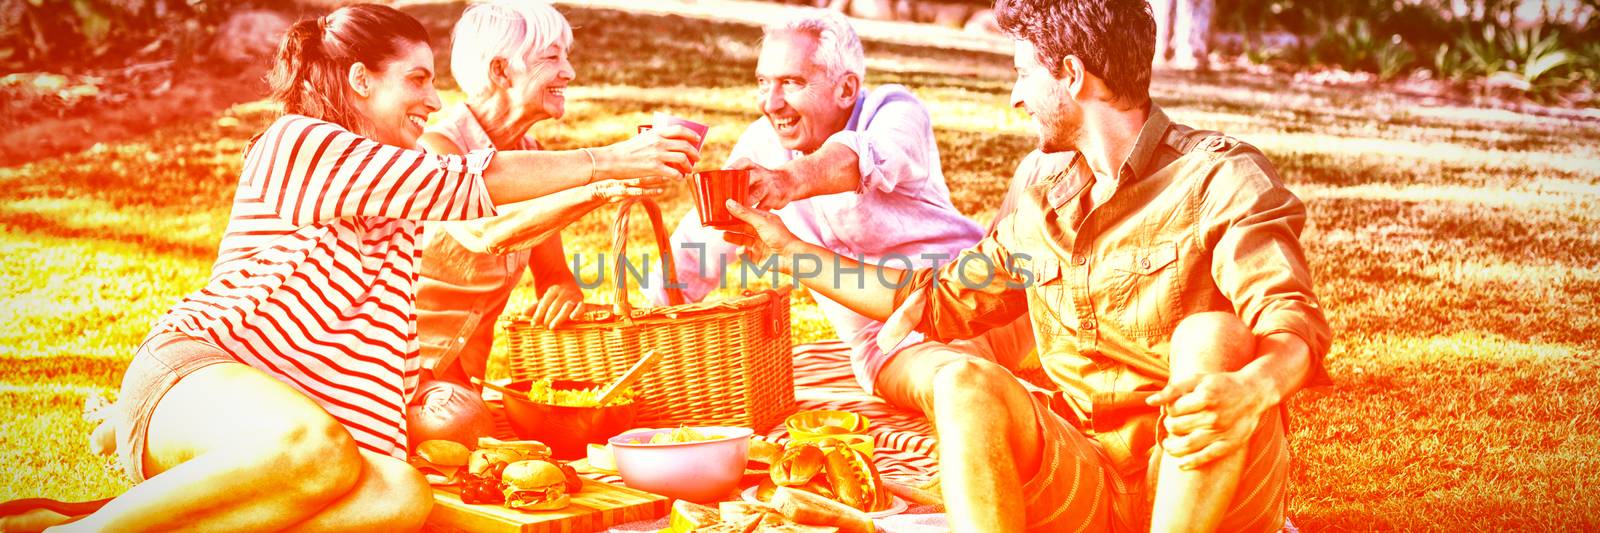 Happy family toasting glasses at picnic in park on a sunny day